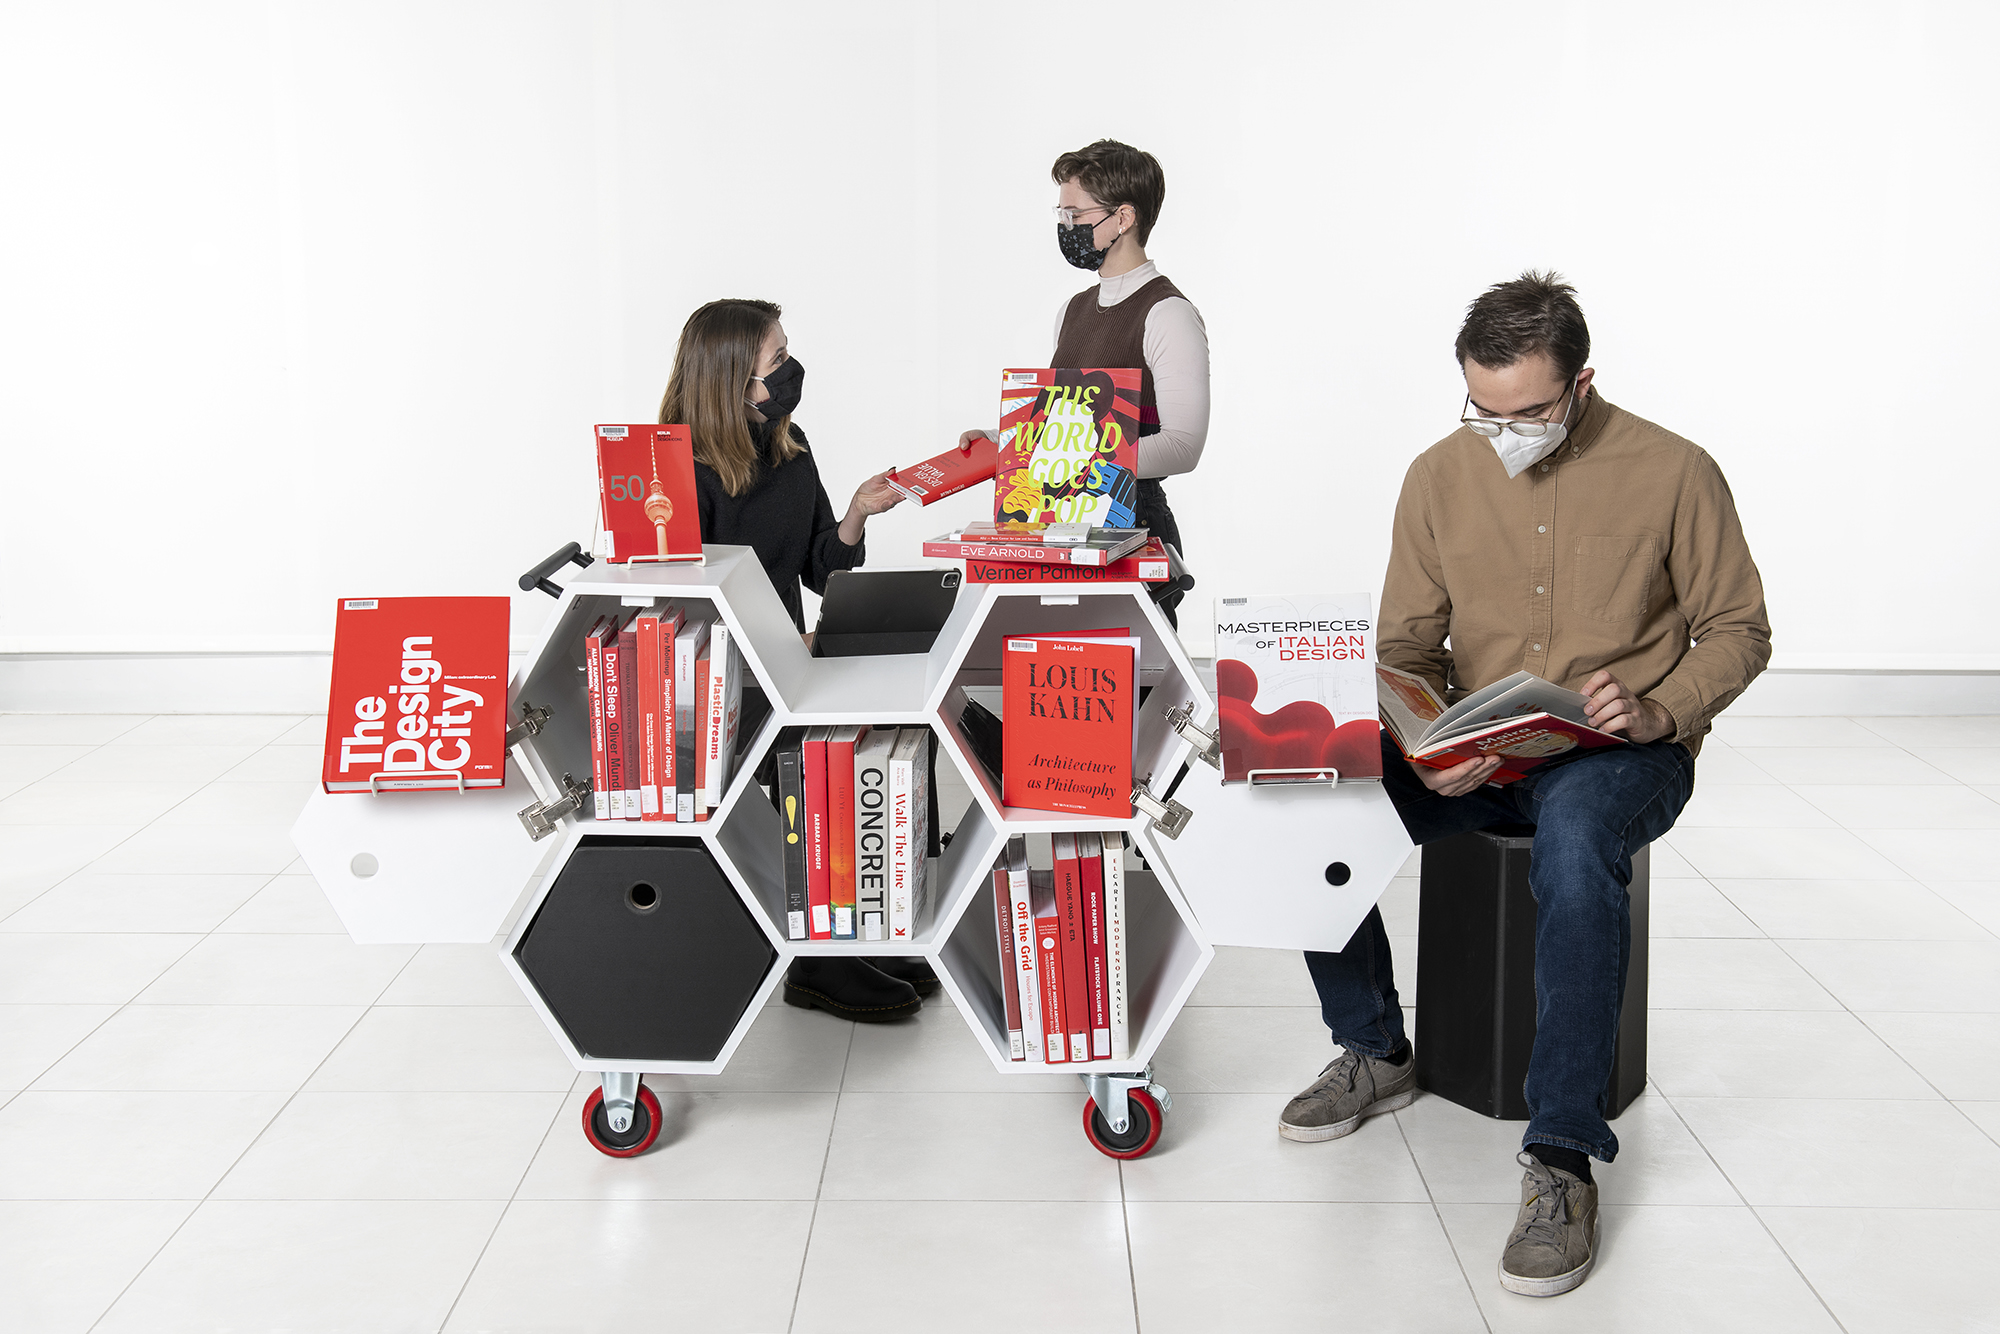 A collection of design books displayed on the Hexacart with students gathering around it.